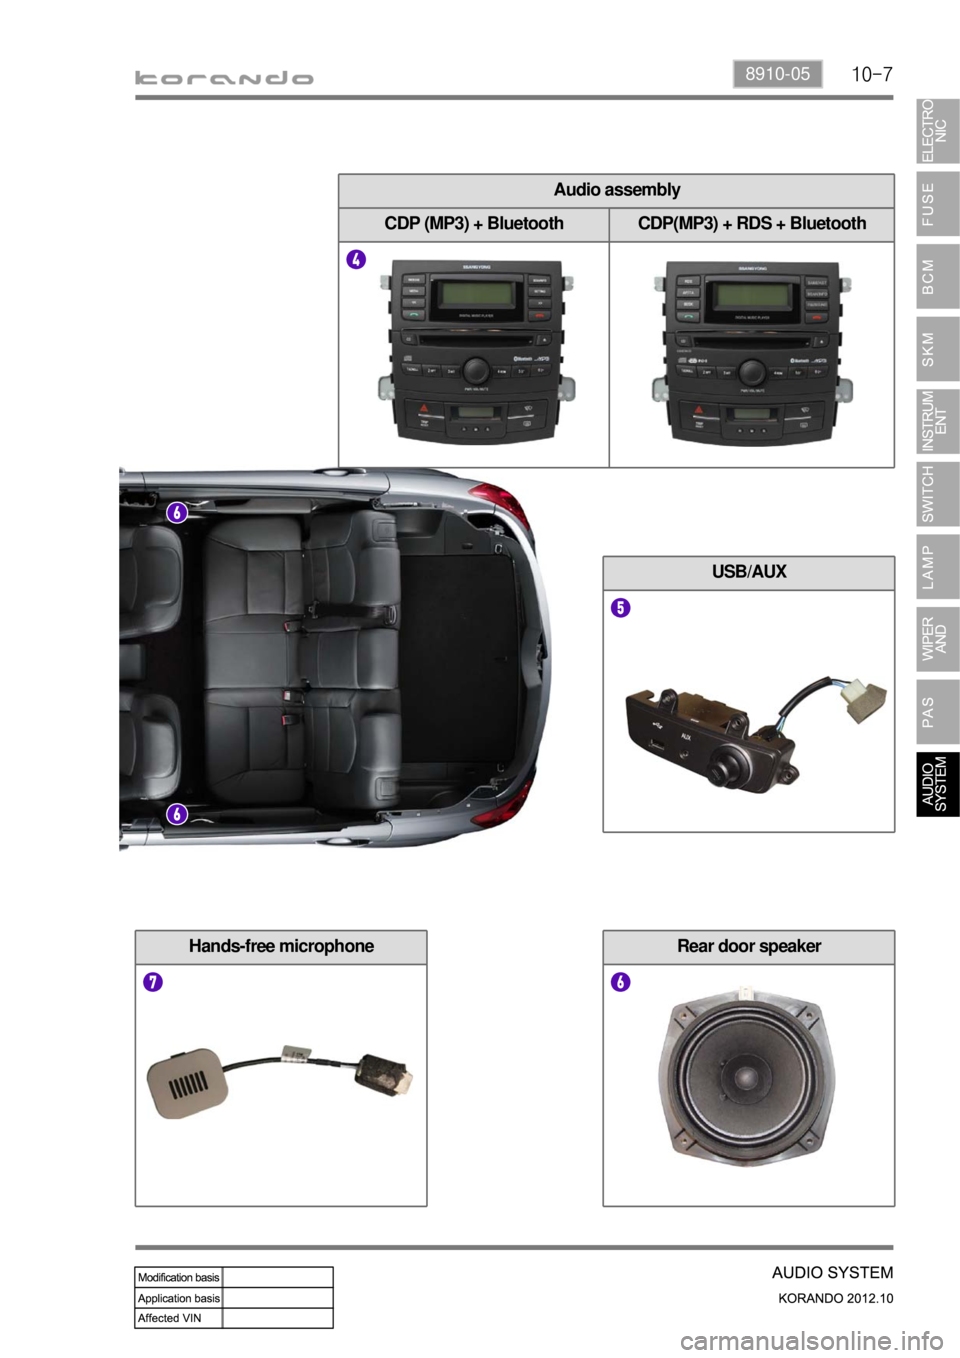 SSANGYONG KORANDO 2012  Service Manual 10-78910-05
Hands-free microphoneRear door speaker
USB/AUX
Audio assembly
CDP (MP3) + Bluetooth CDP(MP3) + RDS + Bluetooth 